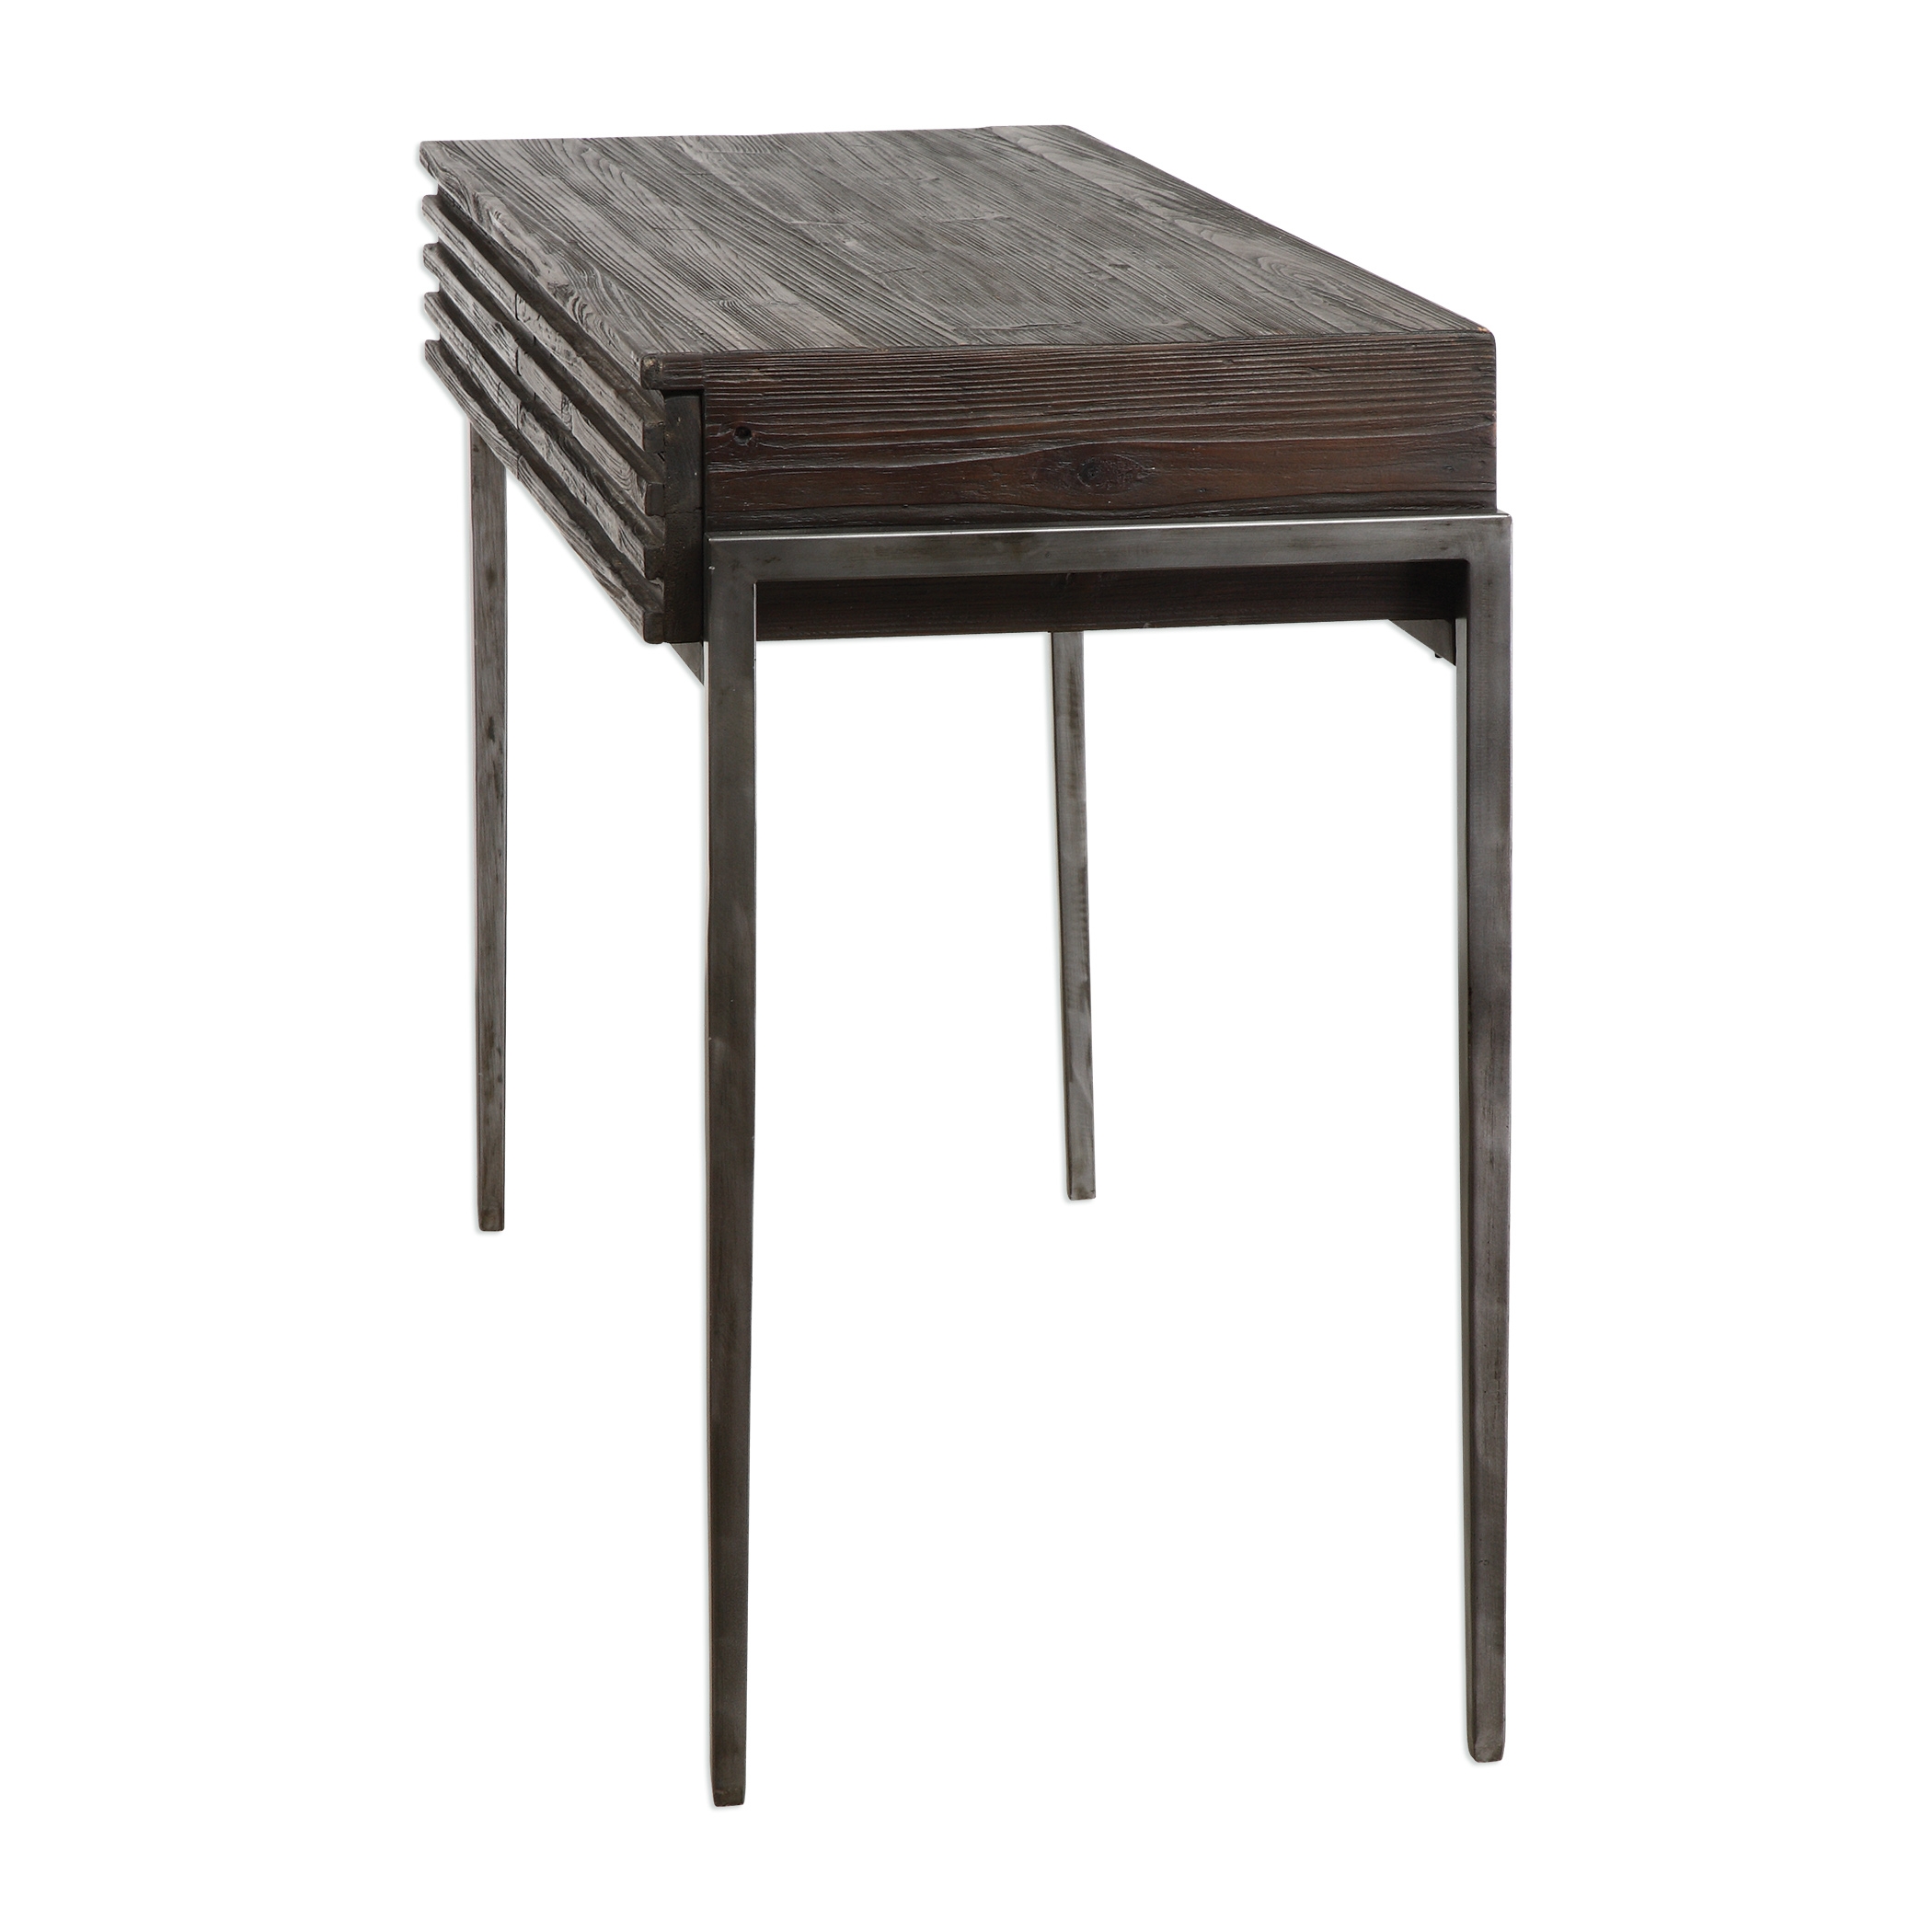 Morrigan Industrial Console Table - Image 3